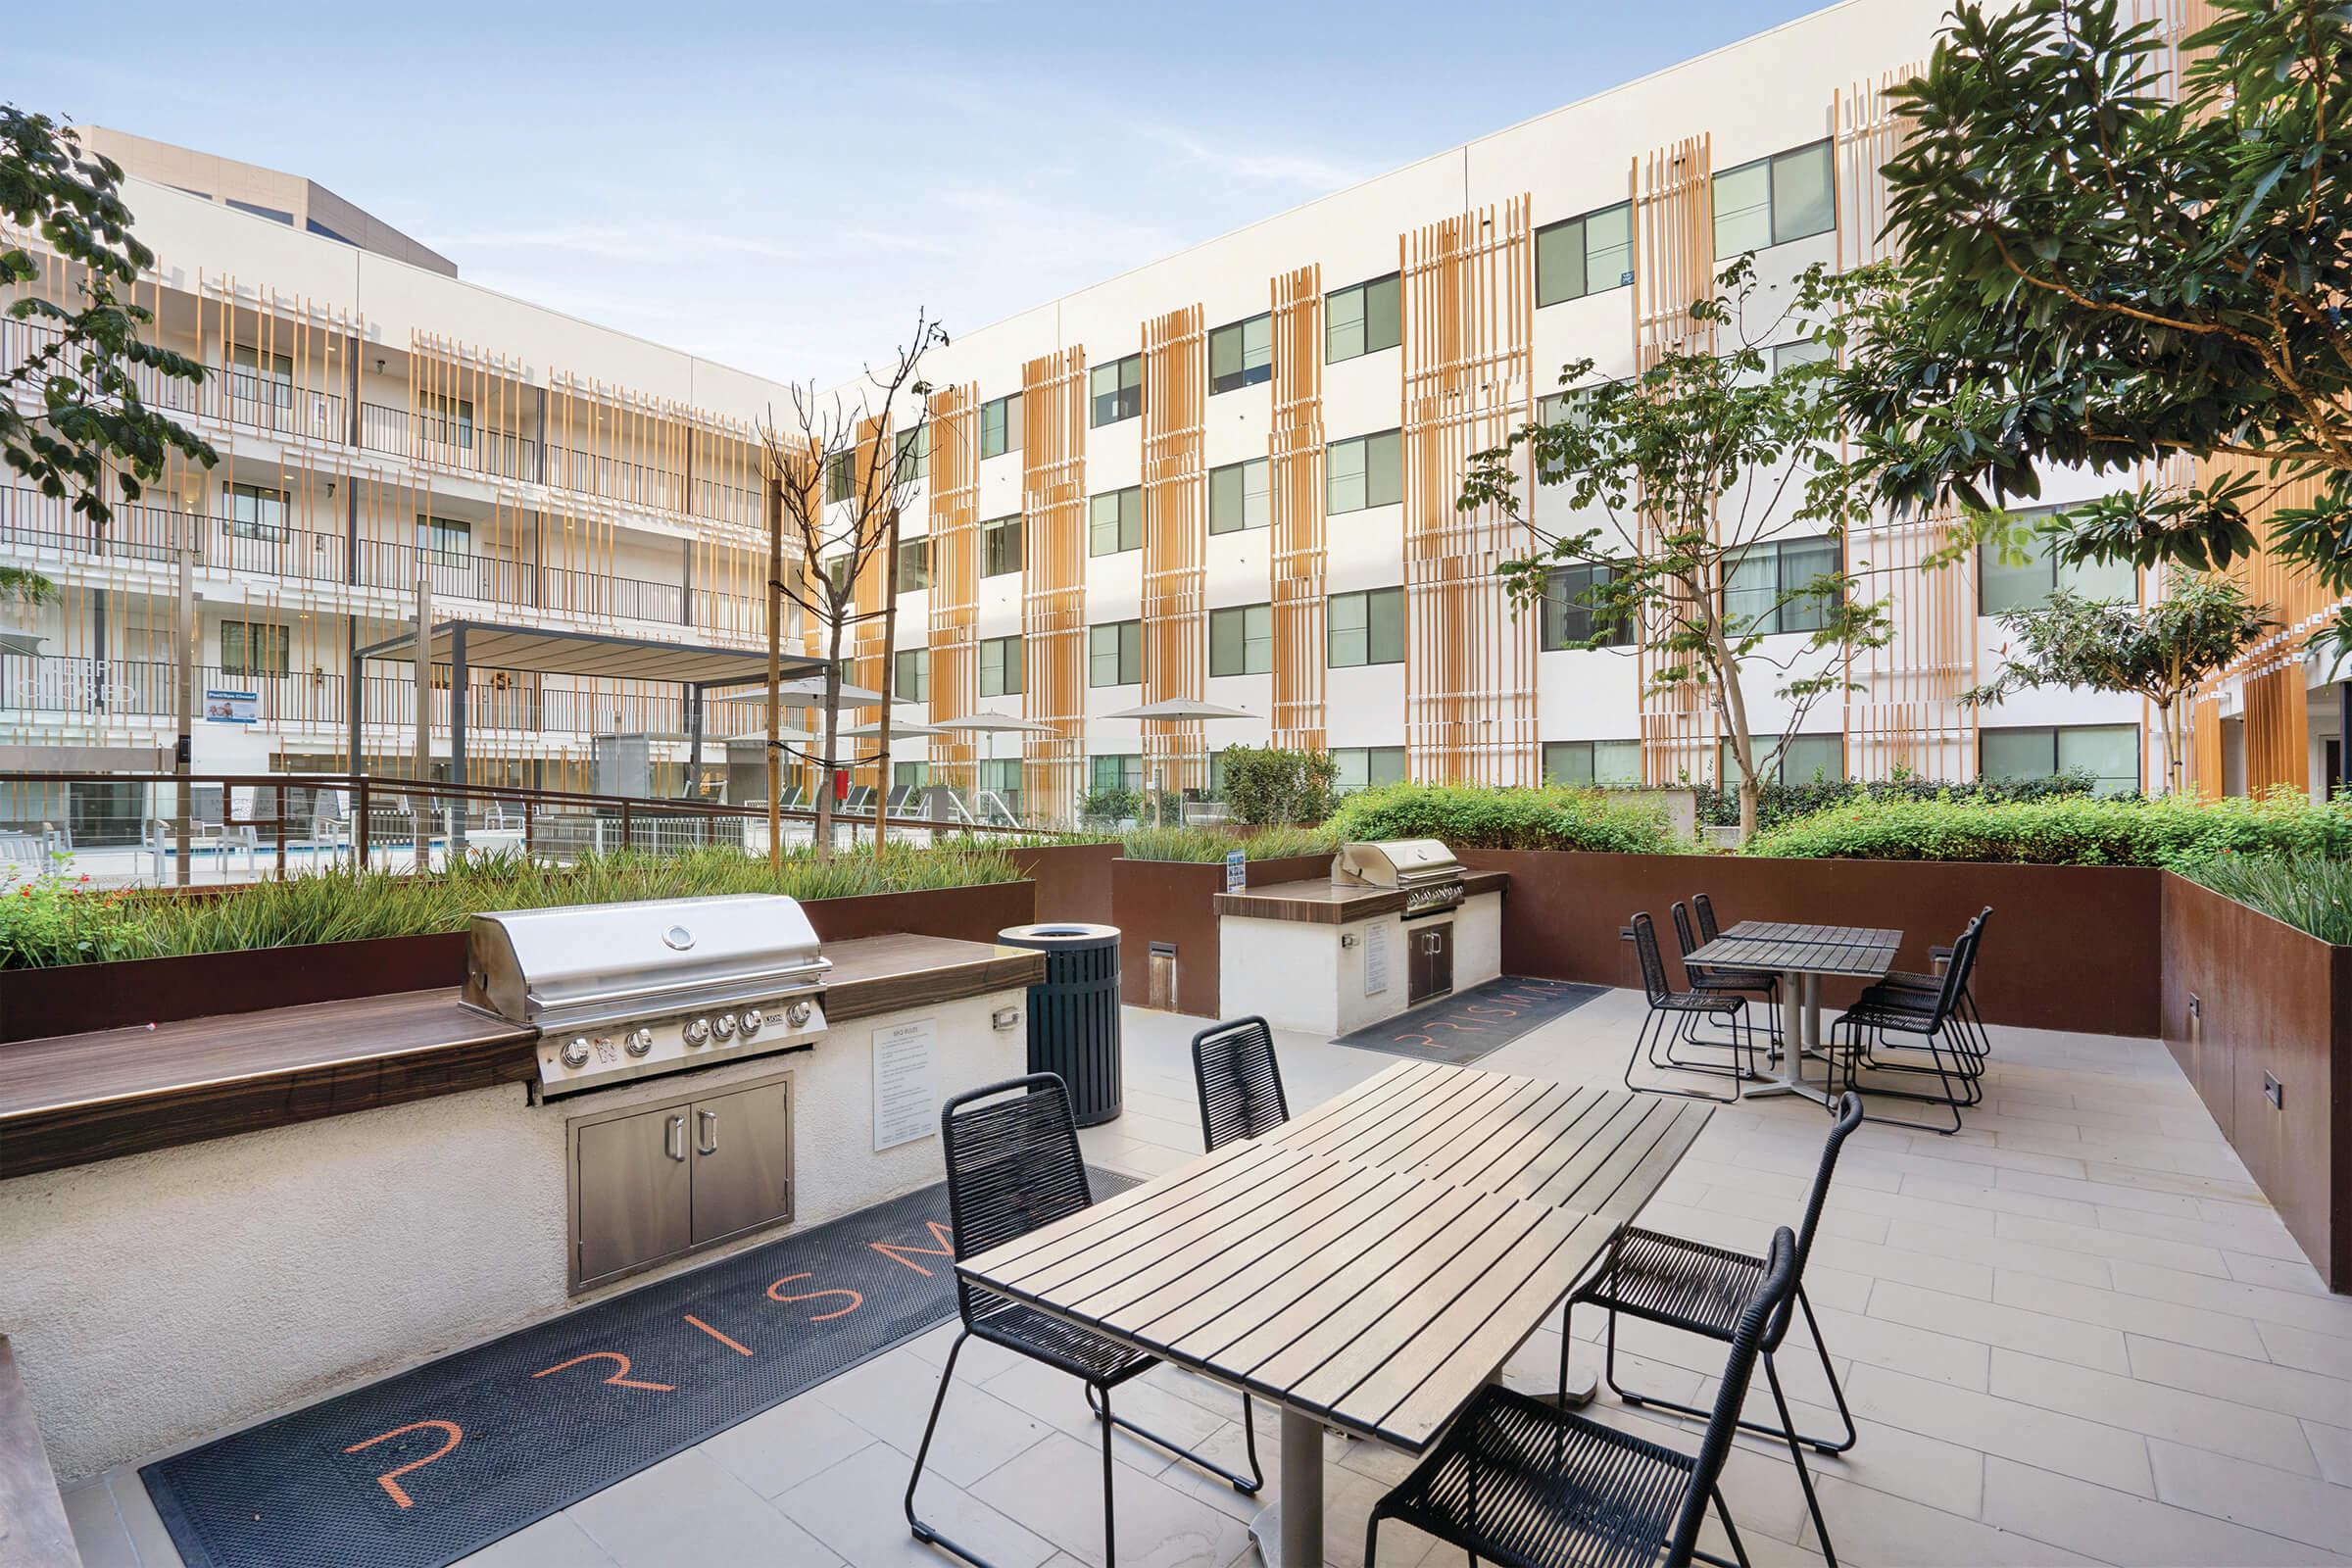 Prisma apartments has a grilling and seating area to enjoy those summer nights